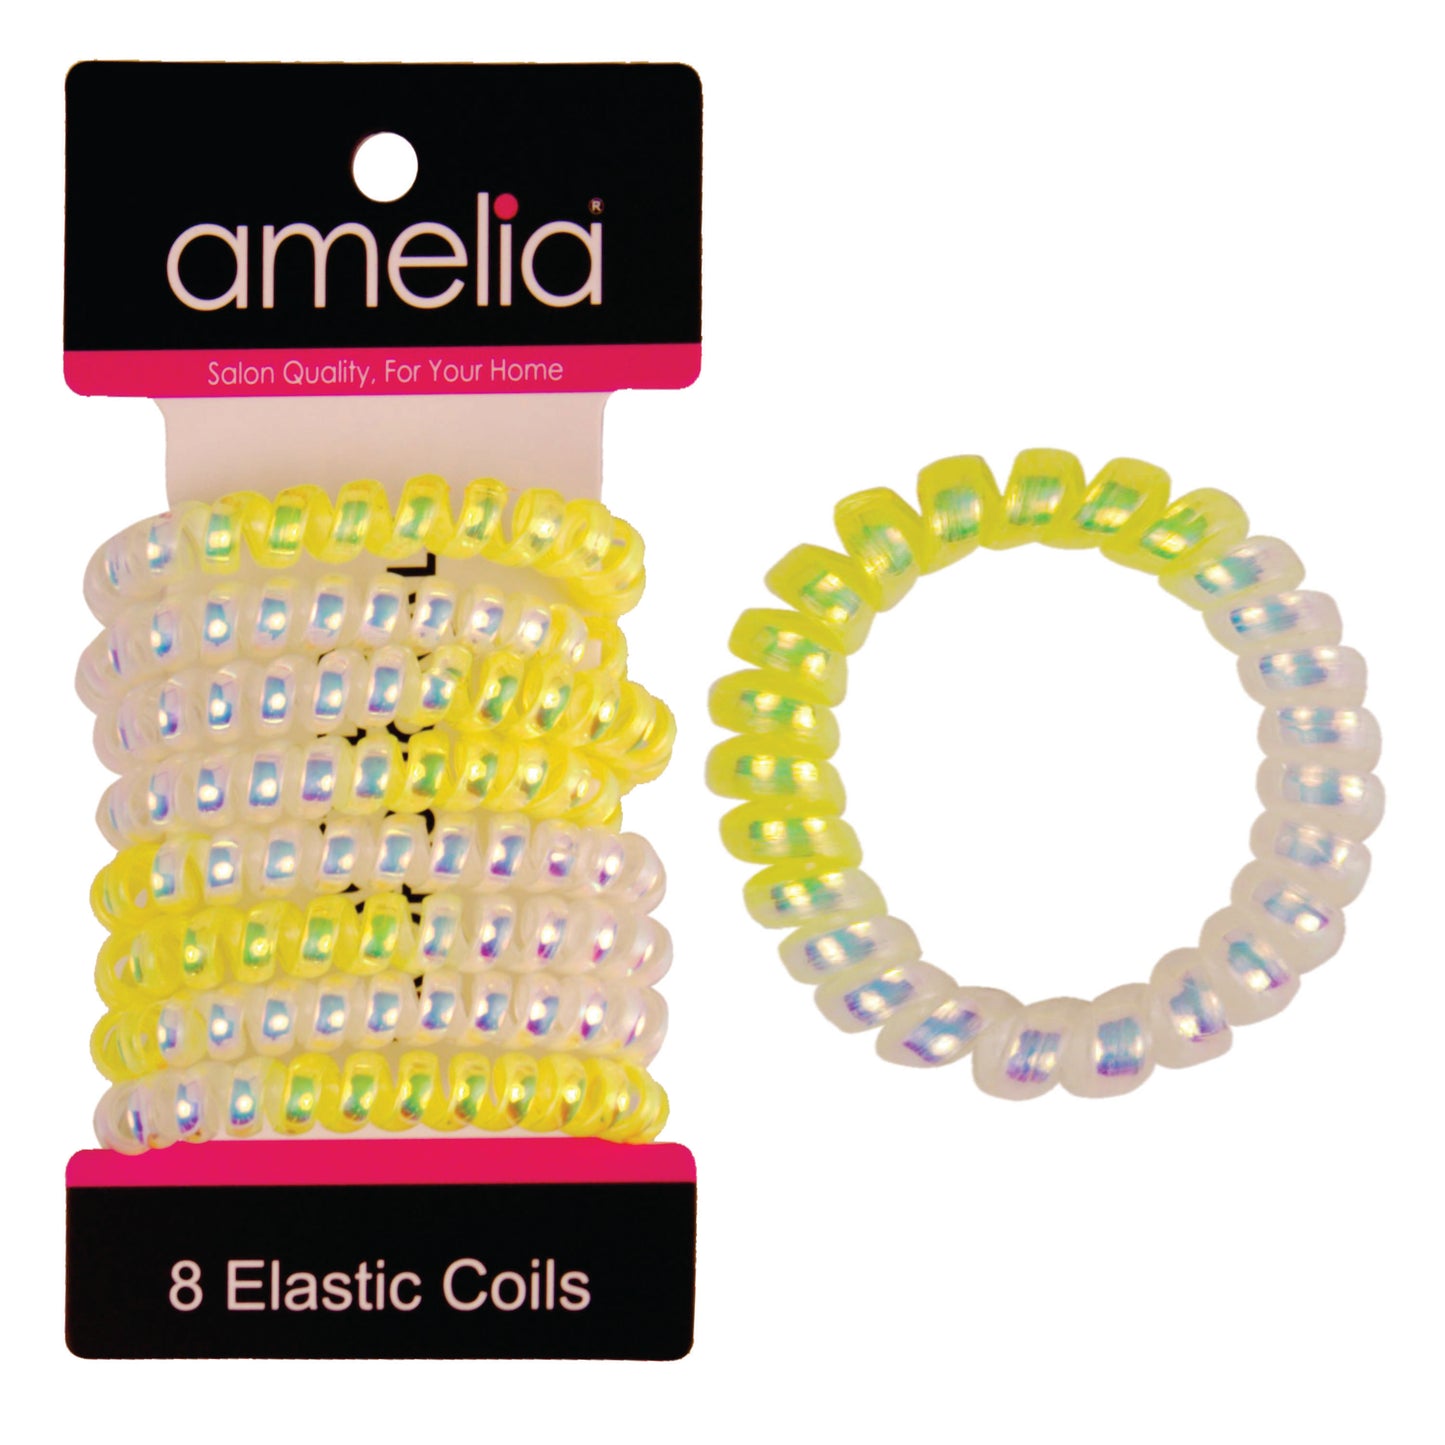 Amelia Beauty Products 8 Medium Smooth Elastic Mutli-Colored Hair Coils, 2.25in Diameter Spiral Hair Ties, Gentle Yet Strong Hold and Minimizes Dents, Yellow/Silver